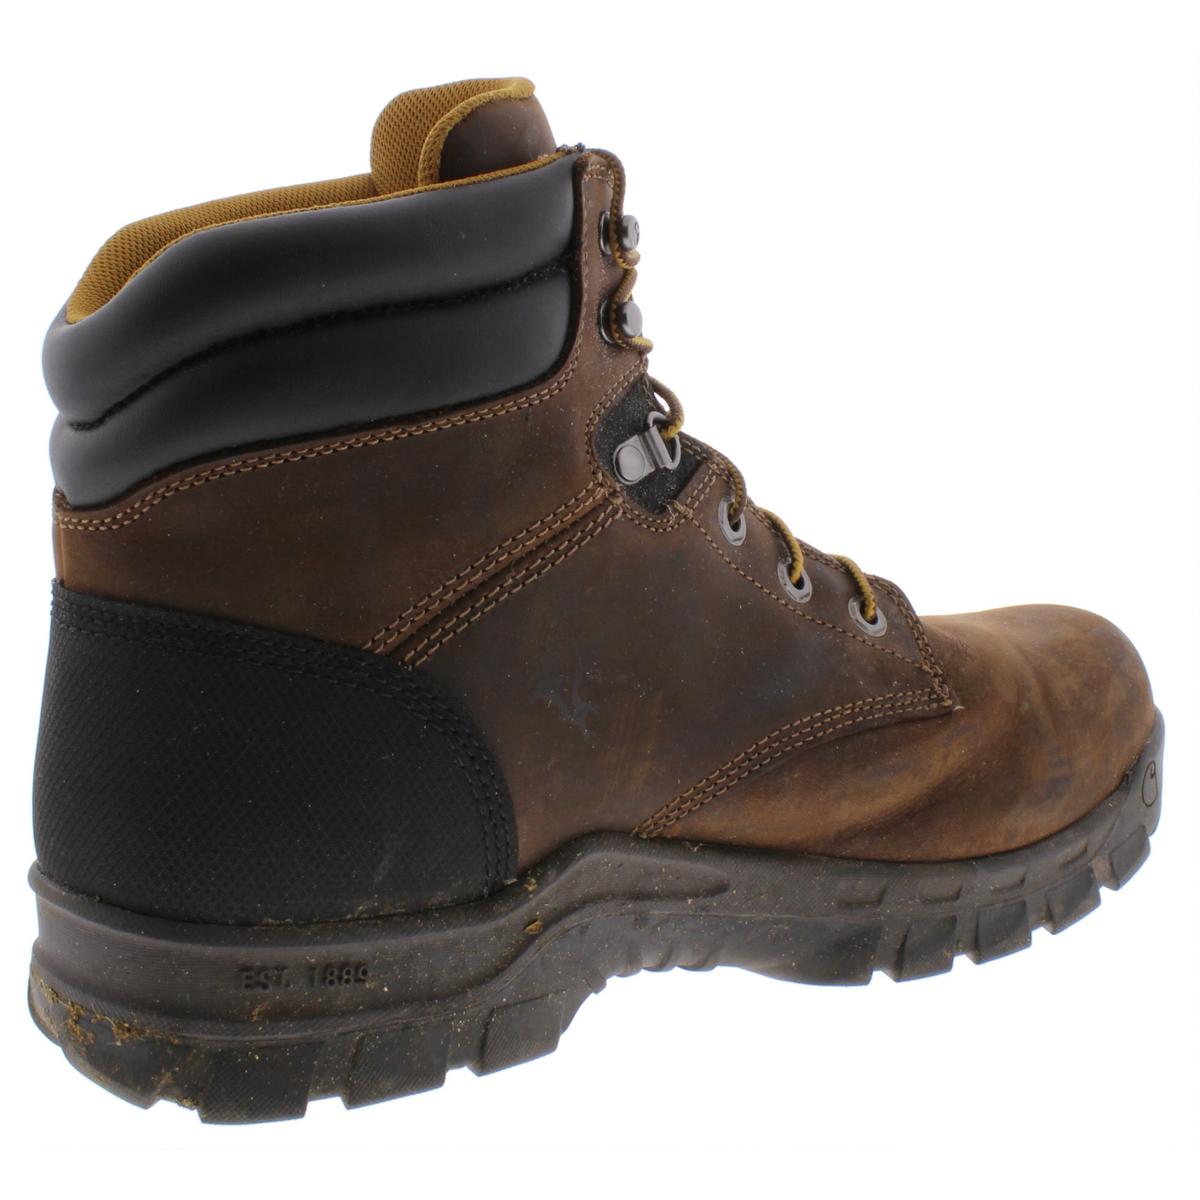 Carhartt Mens Rugged Flex Brown Leather Work Boots Shoes 13 Wide (E ...